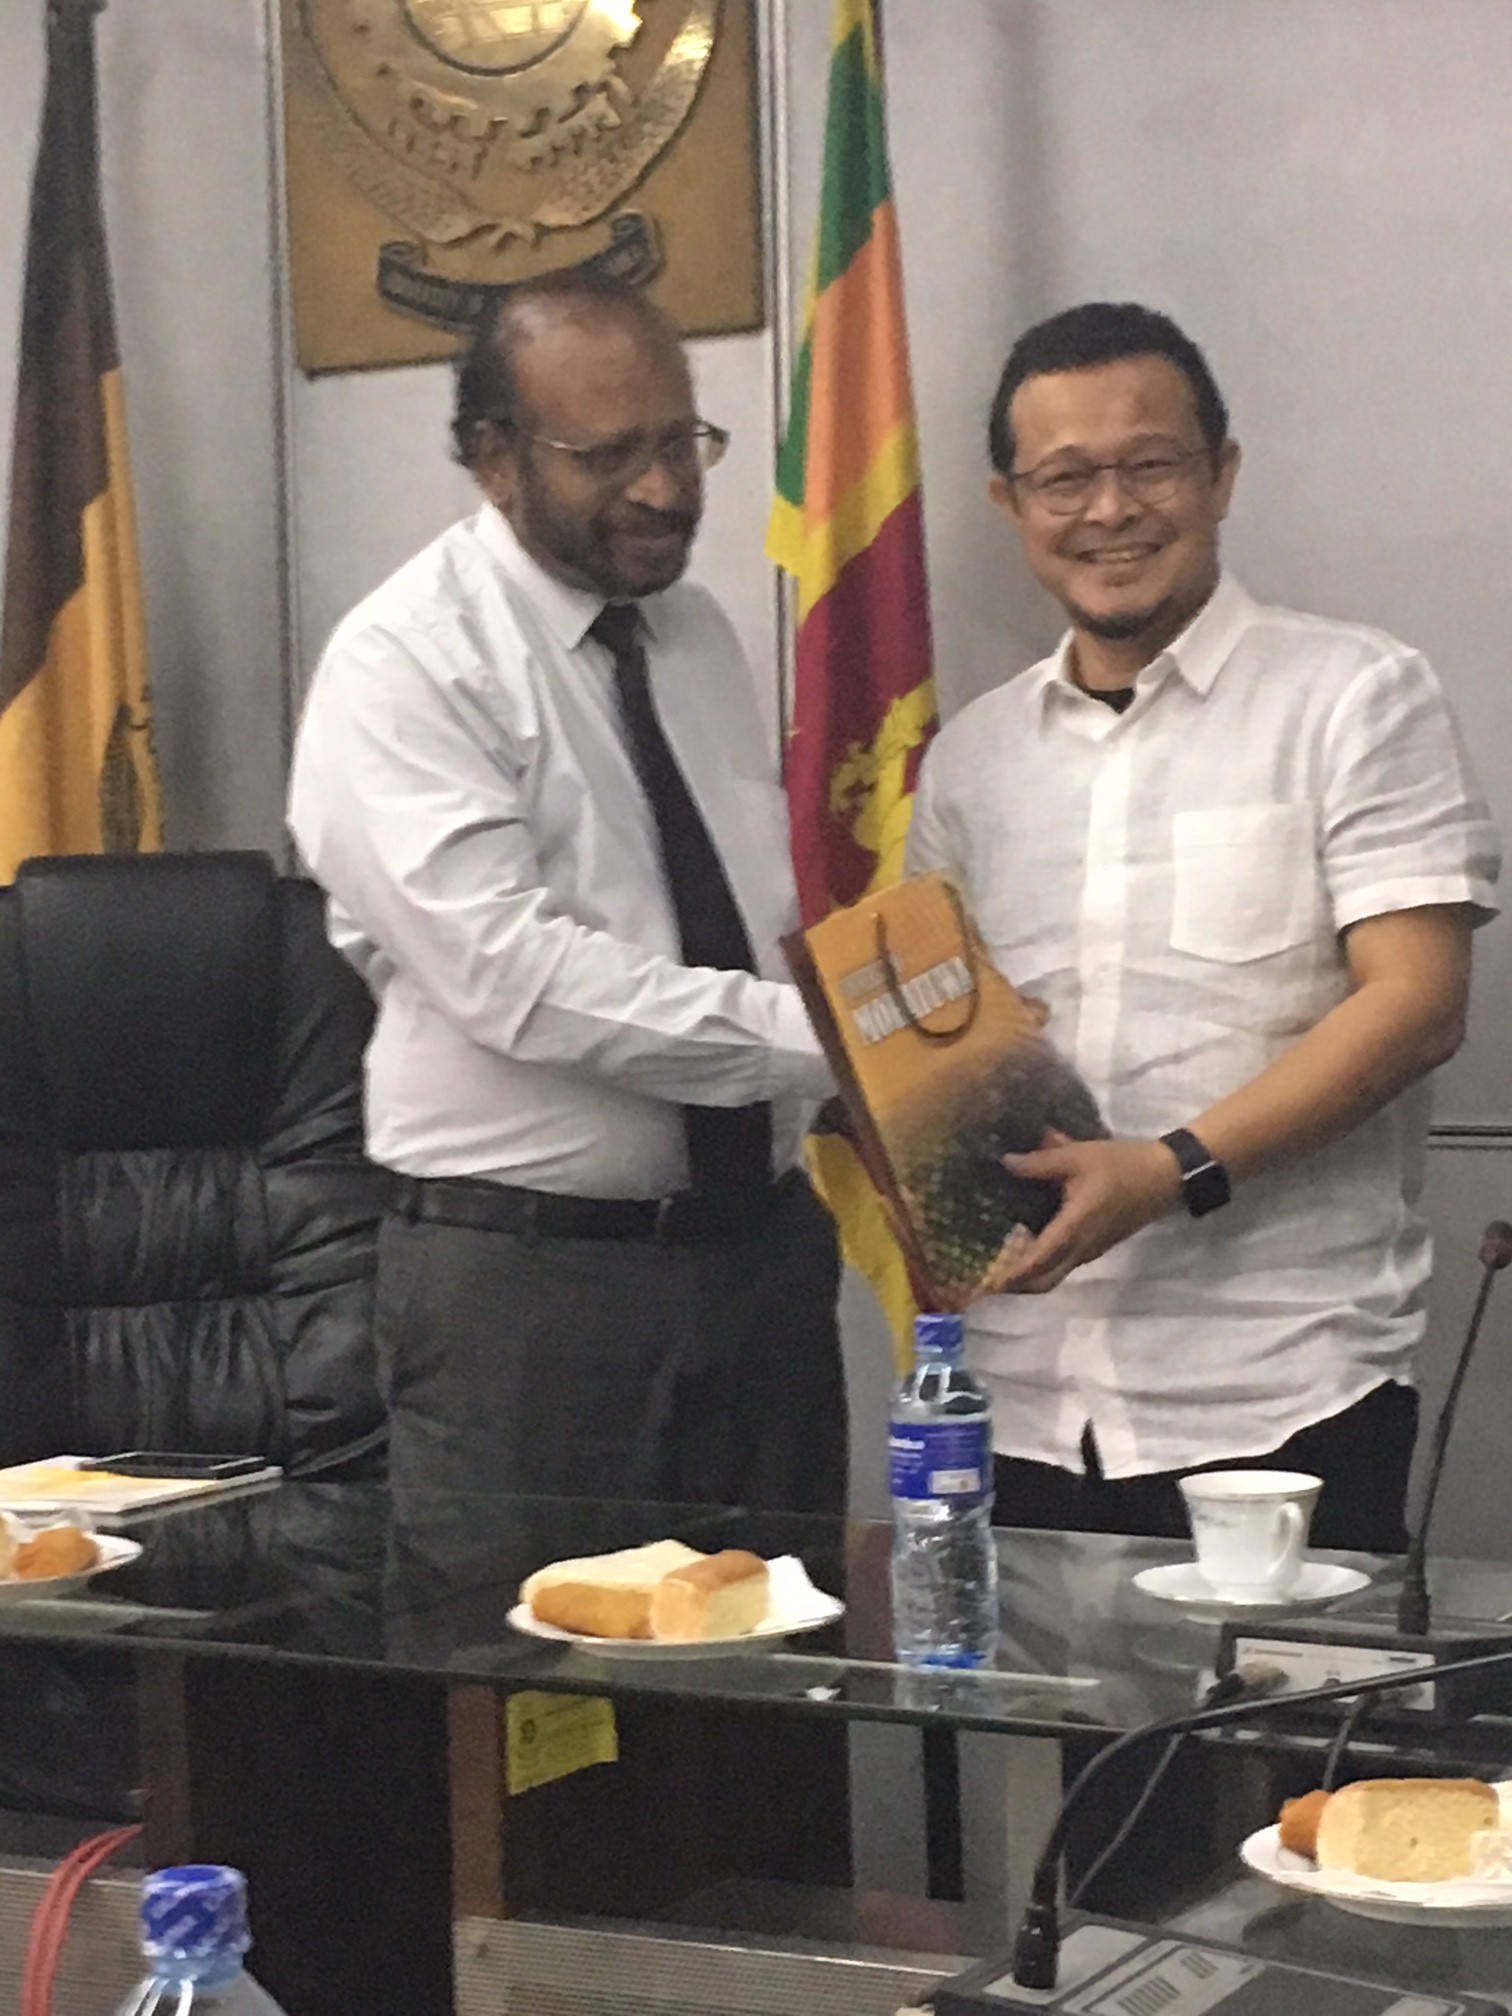 Deputy Director General of Higher Education at the Ministry of Higher Education of Malaysia visits the Faculty of Business